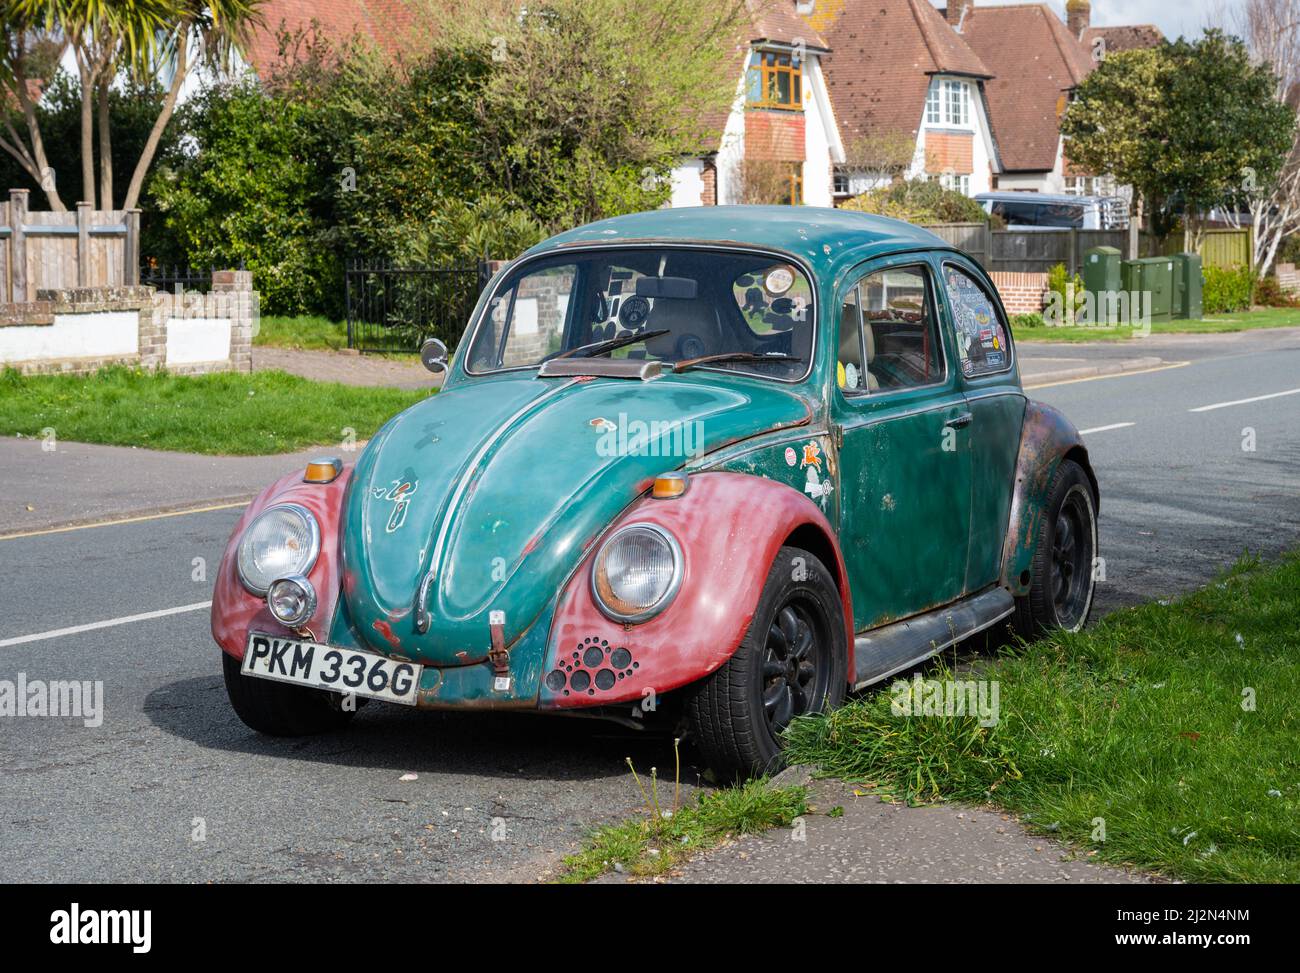 Original Volkswagen Beetle car built 1968, seemingly abandoned & neglected in a rough state of repair parked on the roadside in England, UK. VW Beetle Stock Photo